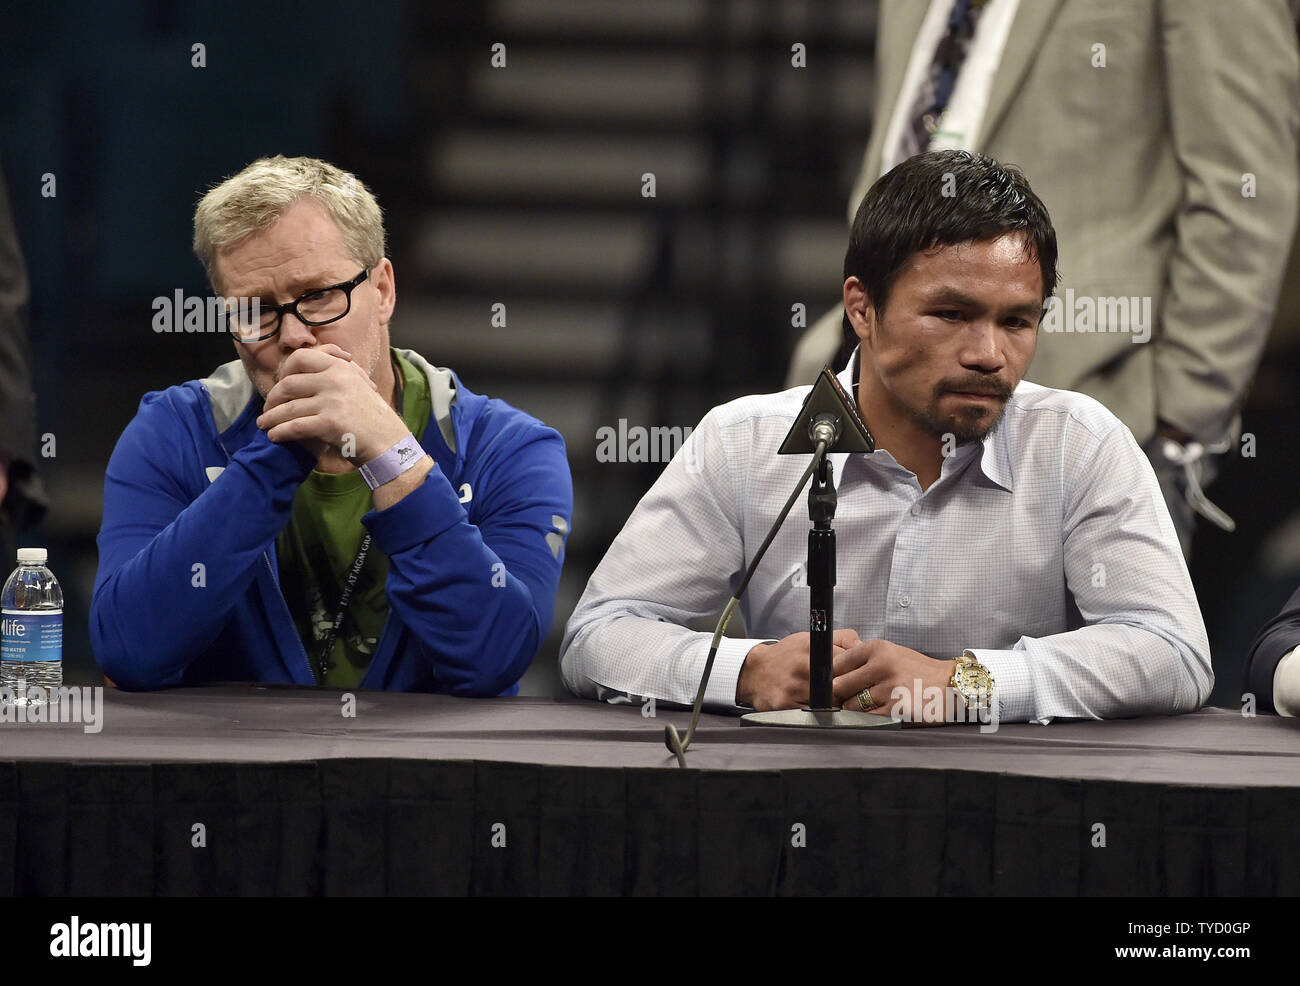 Manny Paciquiao, right, and his trainer, Freddie Roach look on during a news conference after his welterweight unification bout against Floyd Mayweather Jr. at MGM Grand Garden Arena Saturday, May 2, 2015, in Las Vegas, Nevada. Mayweather won with an unanimous decision after the 12 round fight. Photo by David Becker/UPI Stock Photo